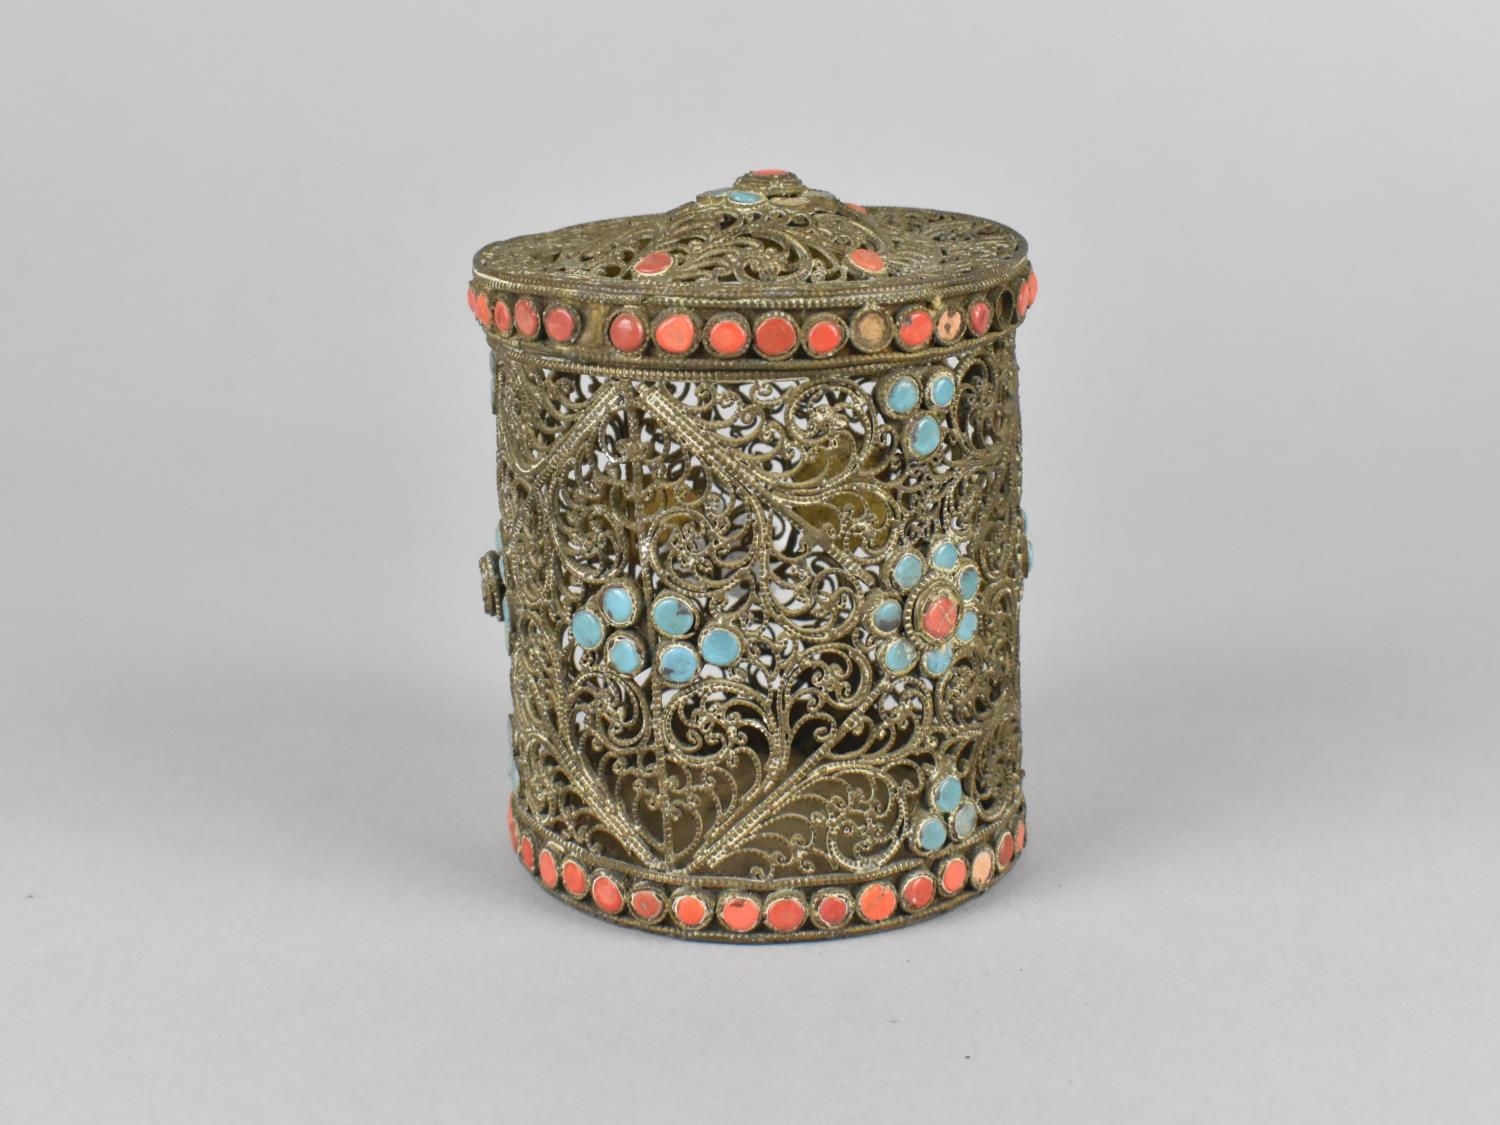 A Late 19th Century White Metal Cylindrical Filigree Box with Turquoise and Coral Cabochons, 9cms - Image 3 of 4